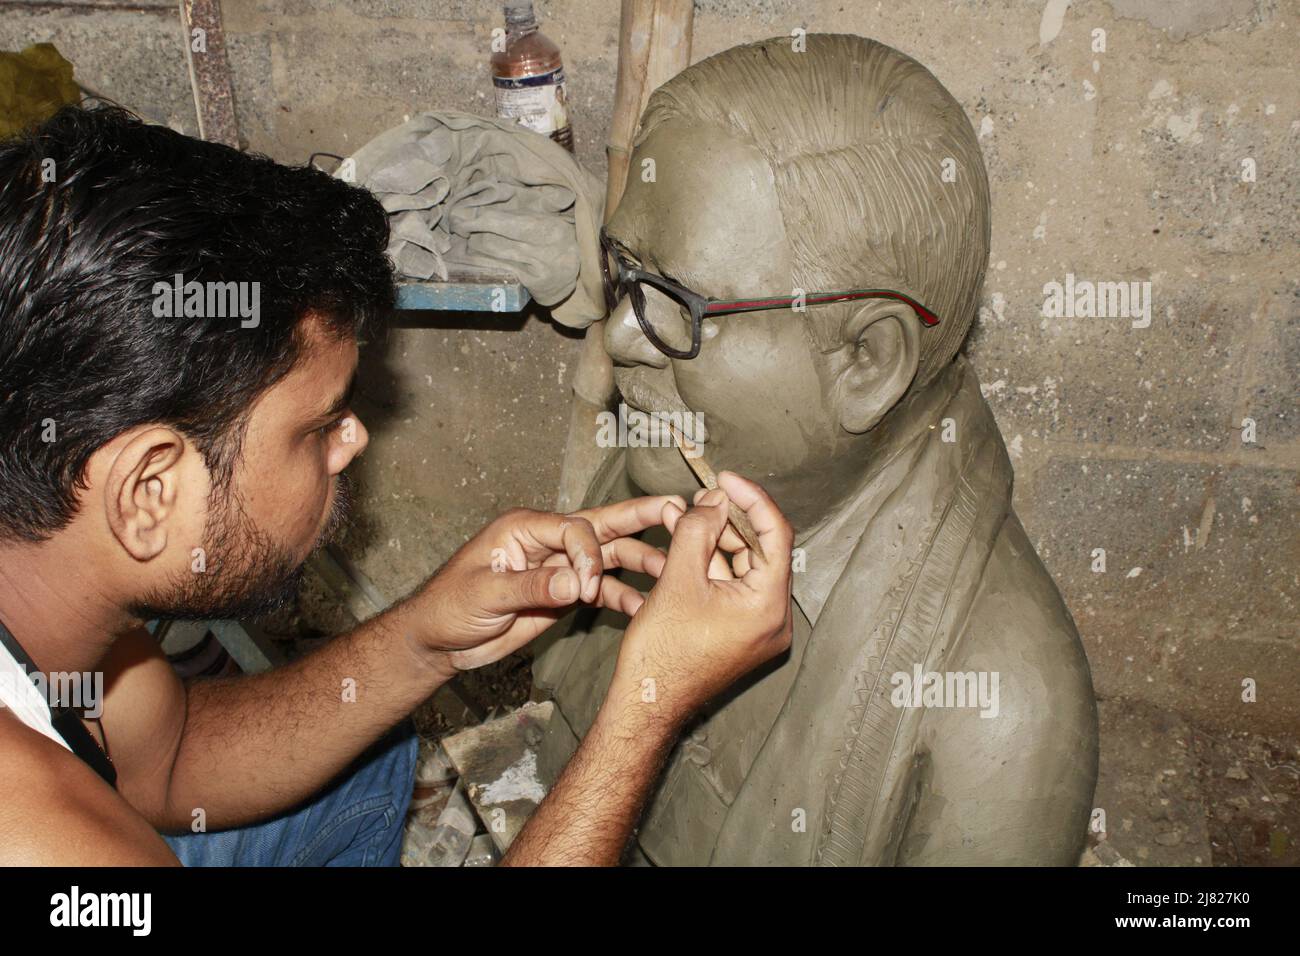 Man's hands making statue of clay. Stock Photo